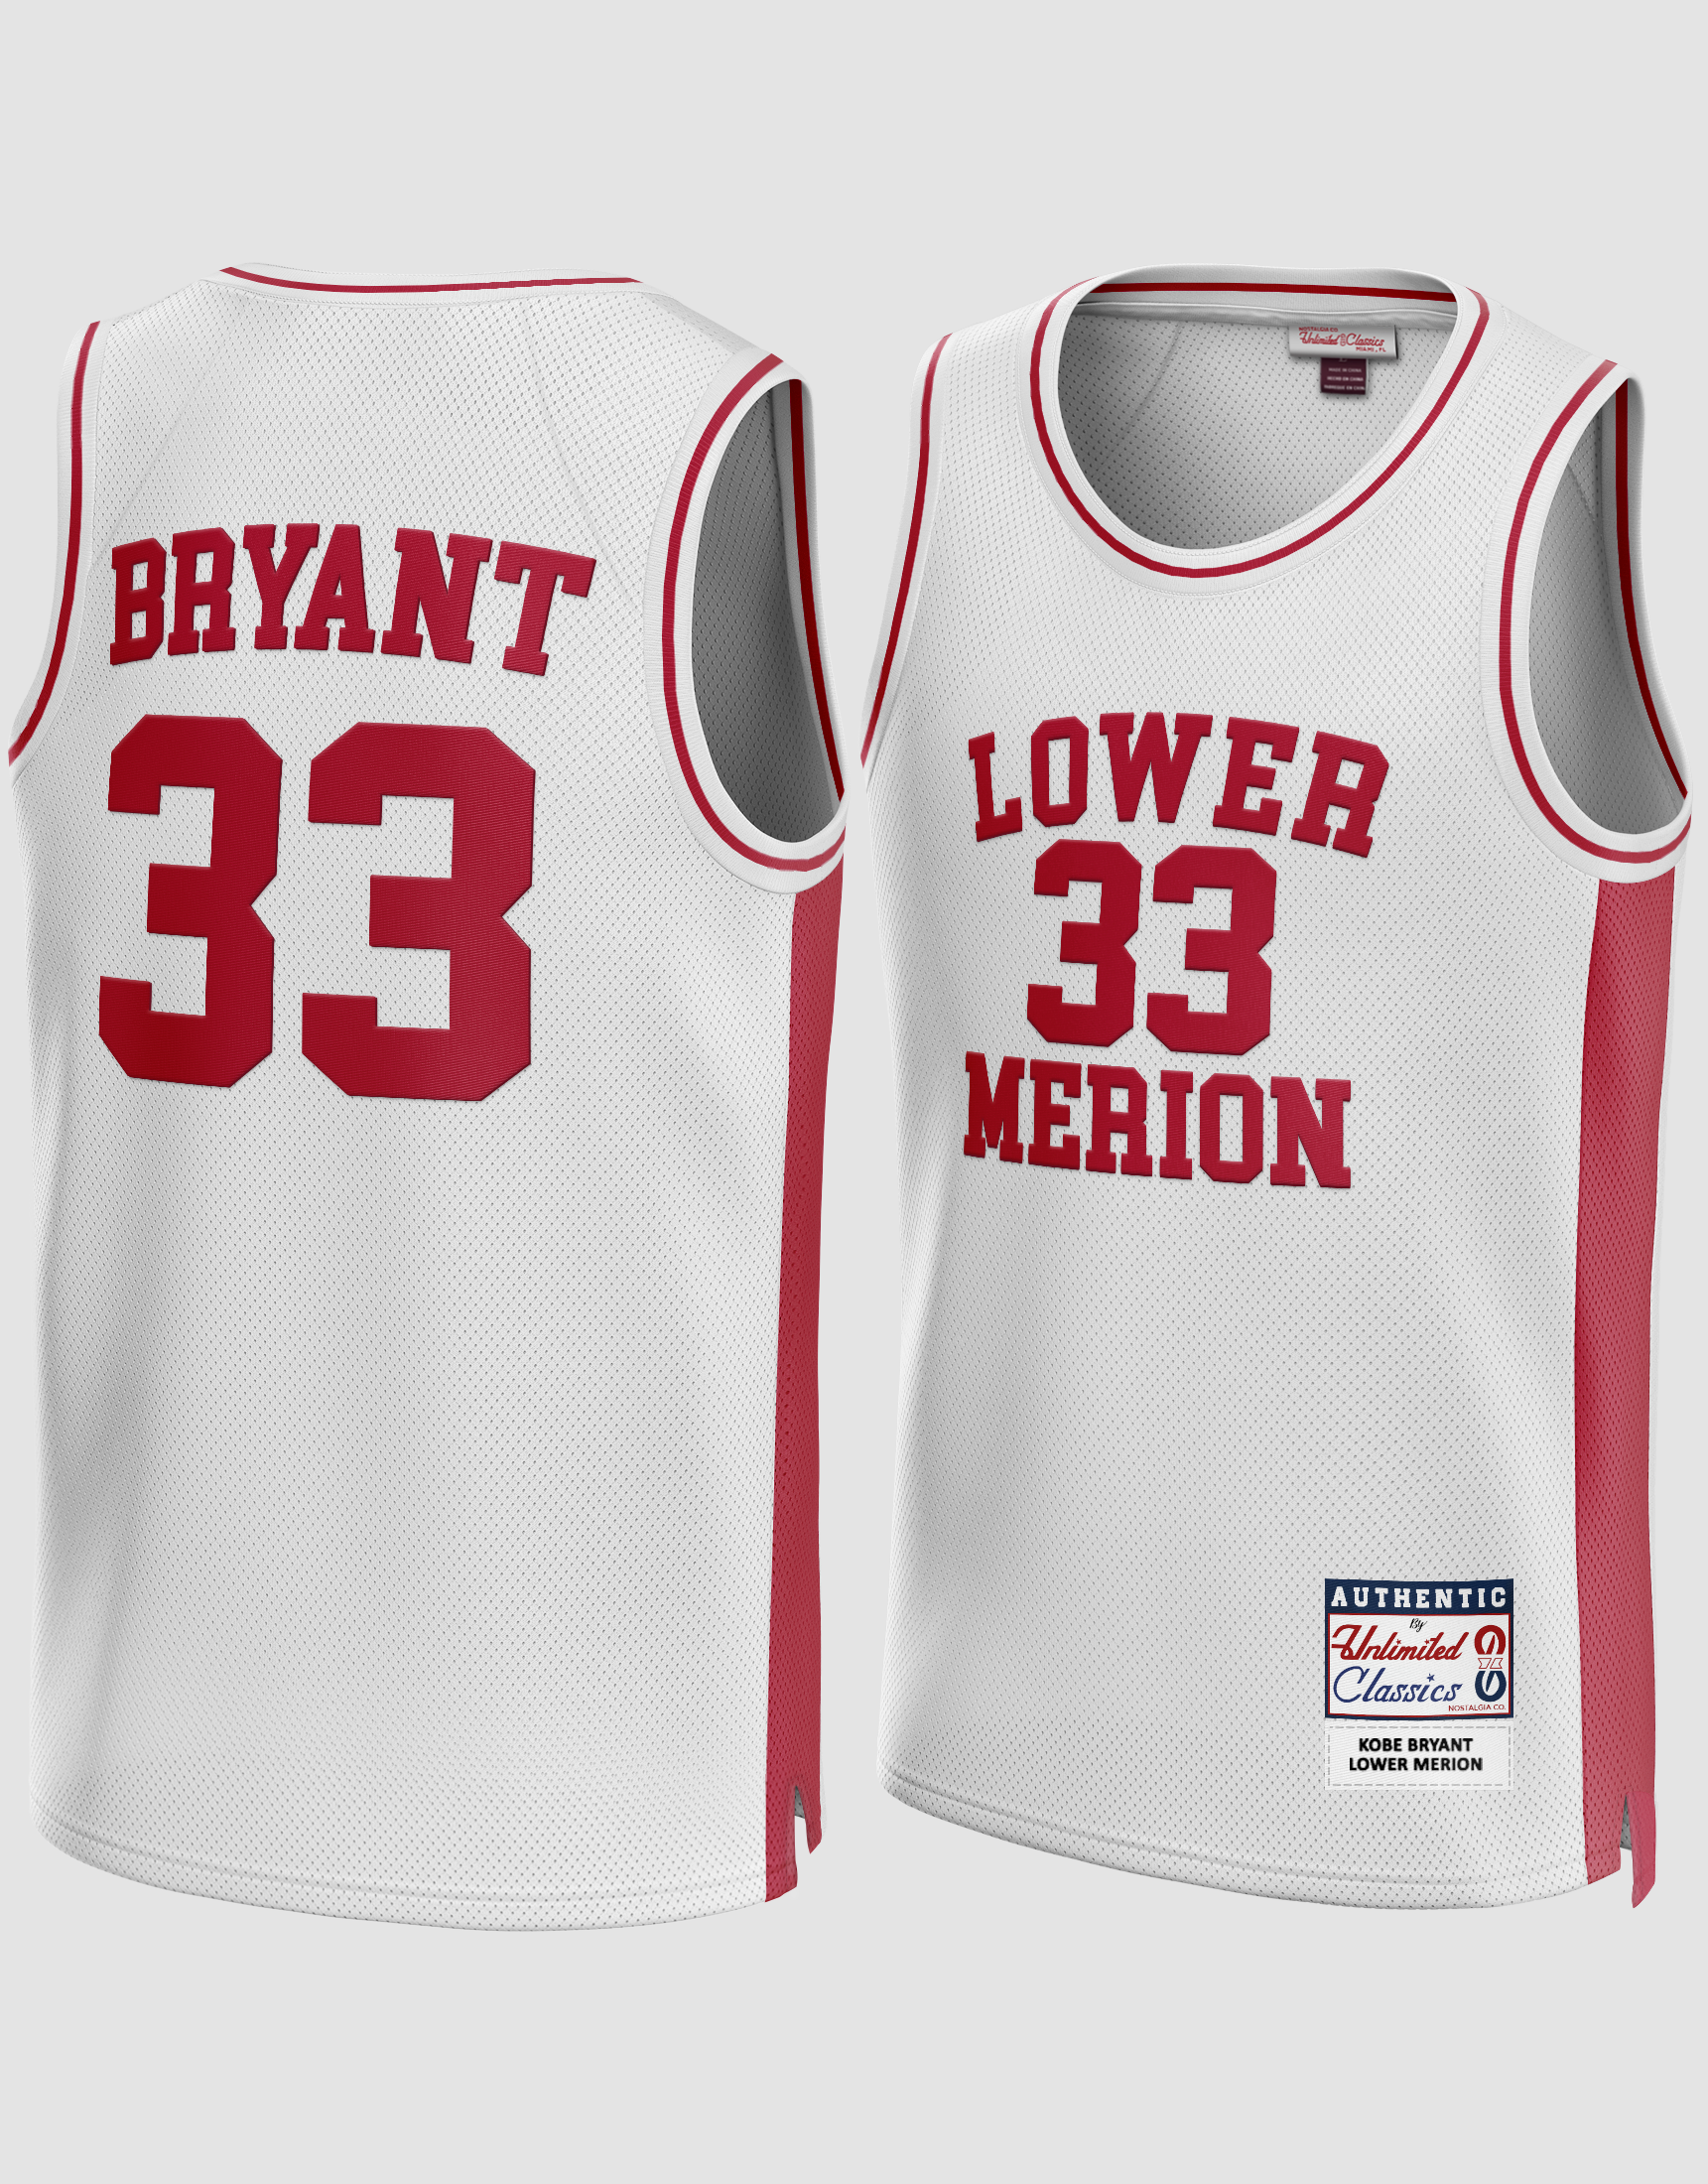 Unlimited Classics Shop Online Bryant #33 Lower Merion High School Basketball Jersey | USA 2XL